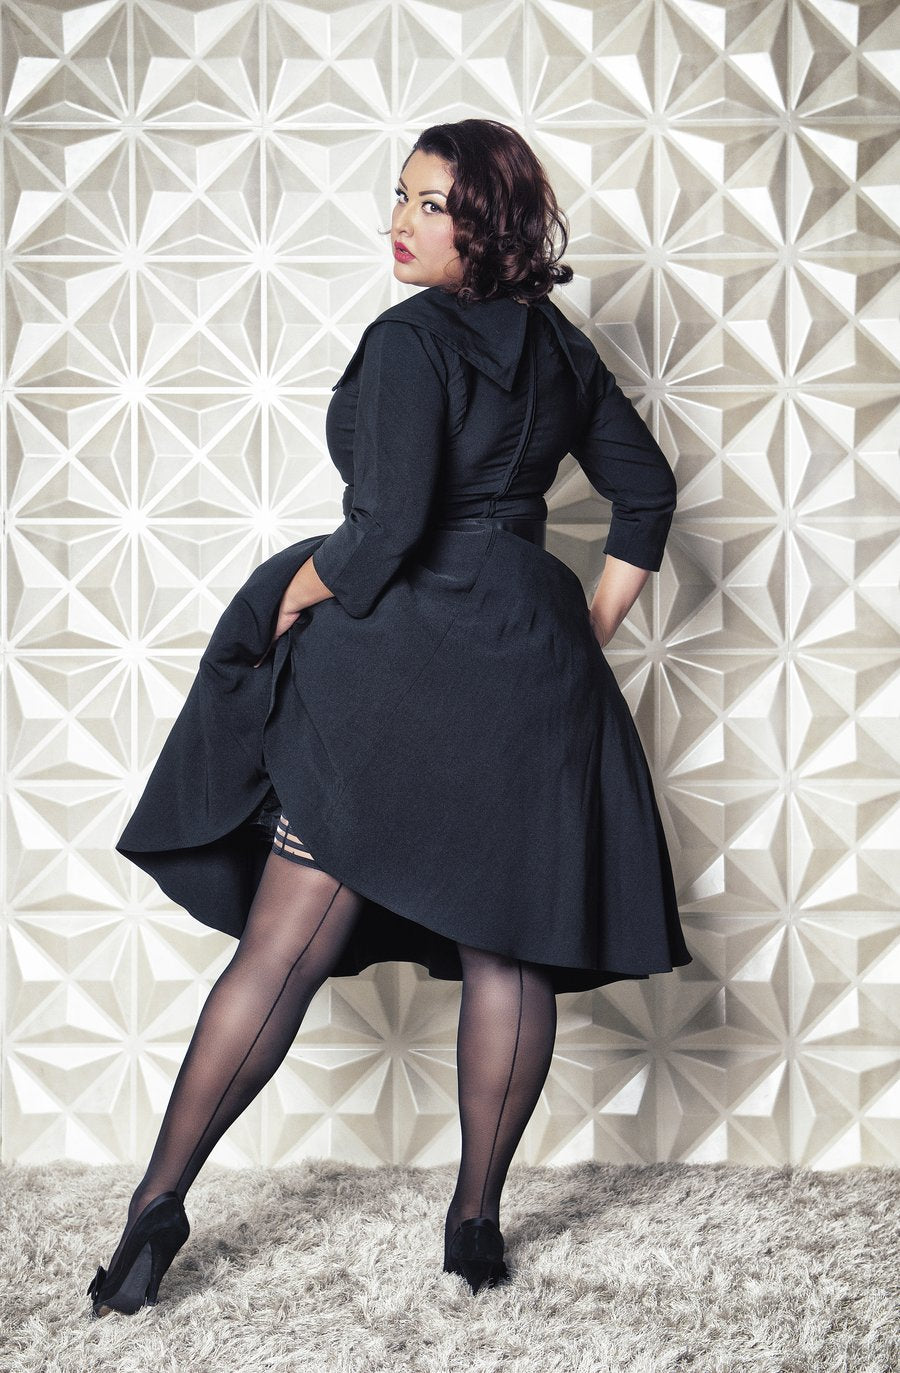 A feminine model wearing a black dress stands facing a wall, showing the back of the Lois Black Sheer Thigh Highs with Back Seam.